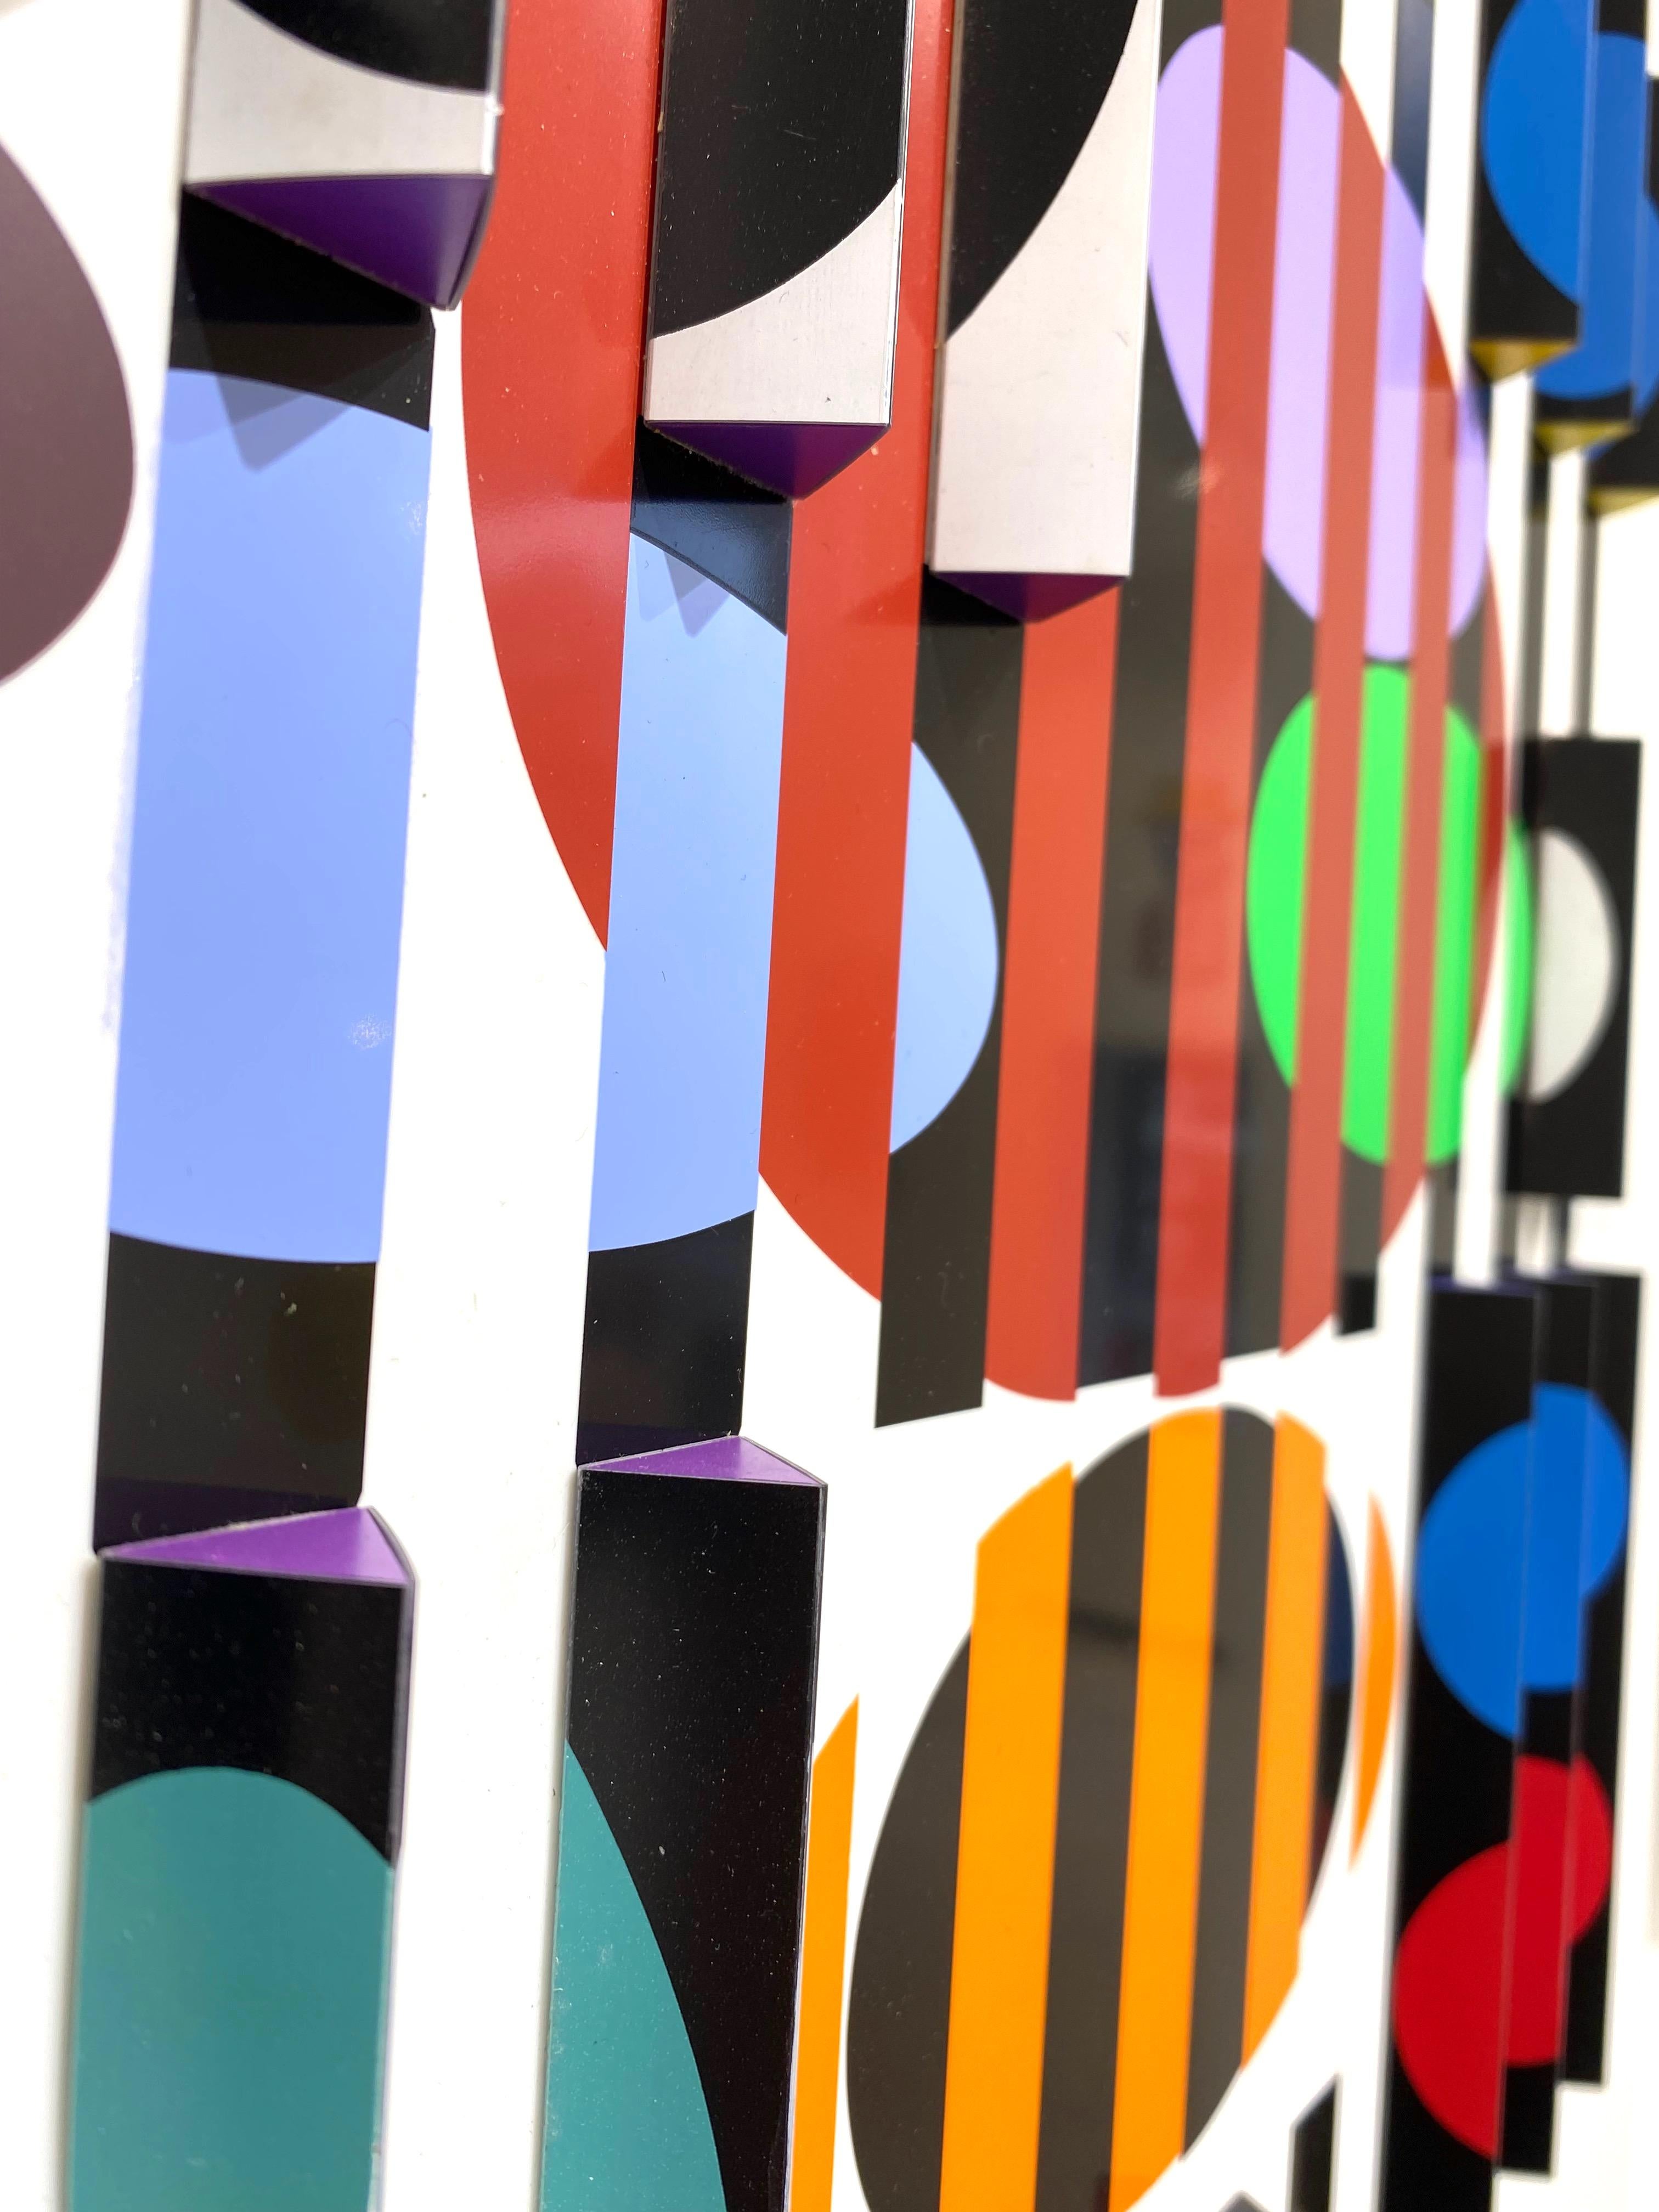 Discover the mesmerizing world of Yaacov Agam with 